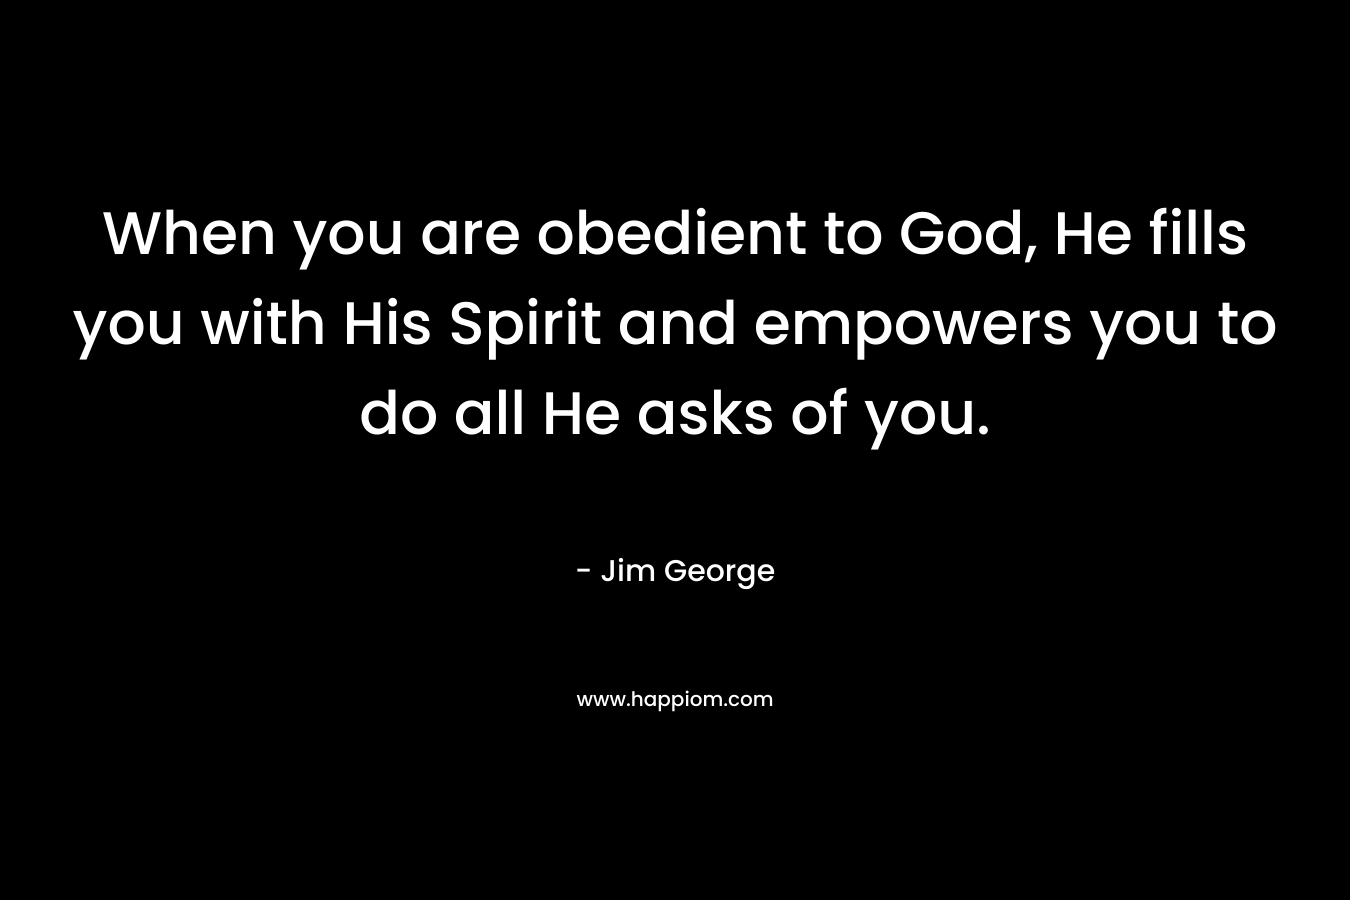 When you are obedient to God, He fills you with His Spirit and empowers you to do all He asks of you.